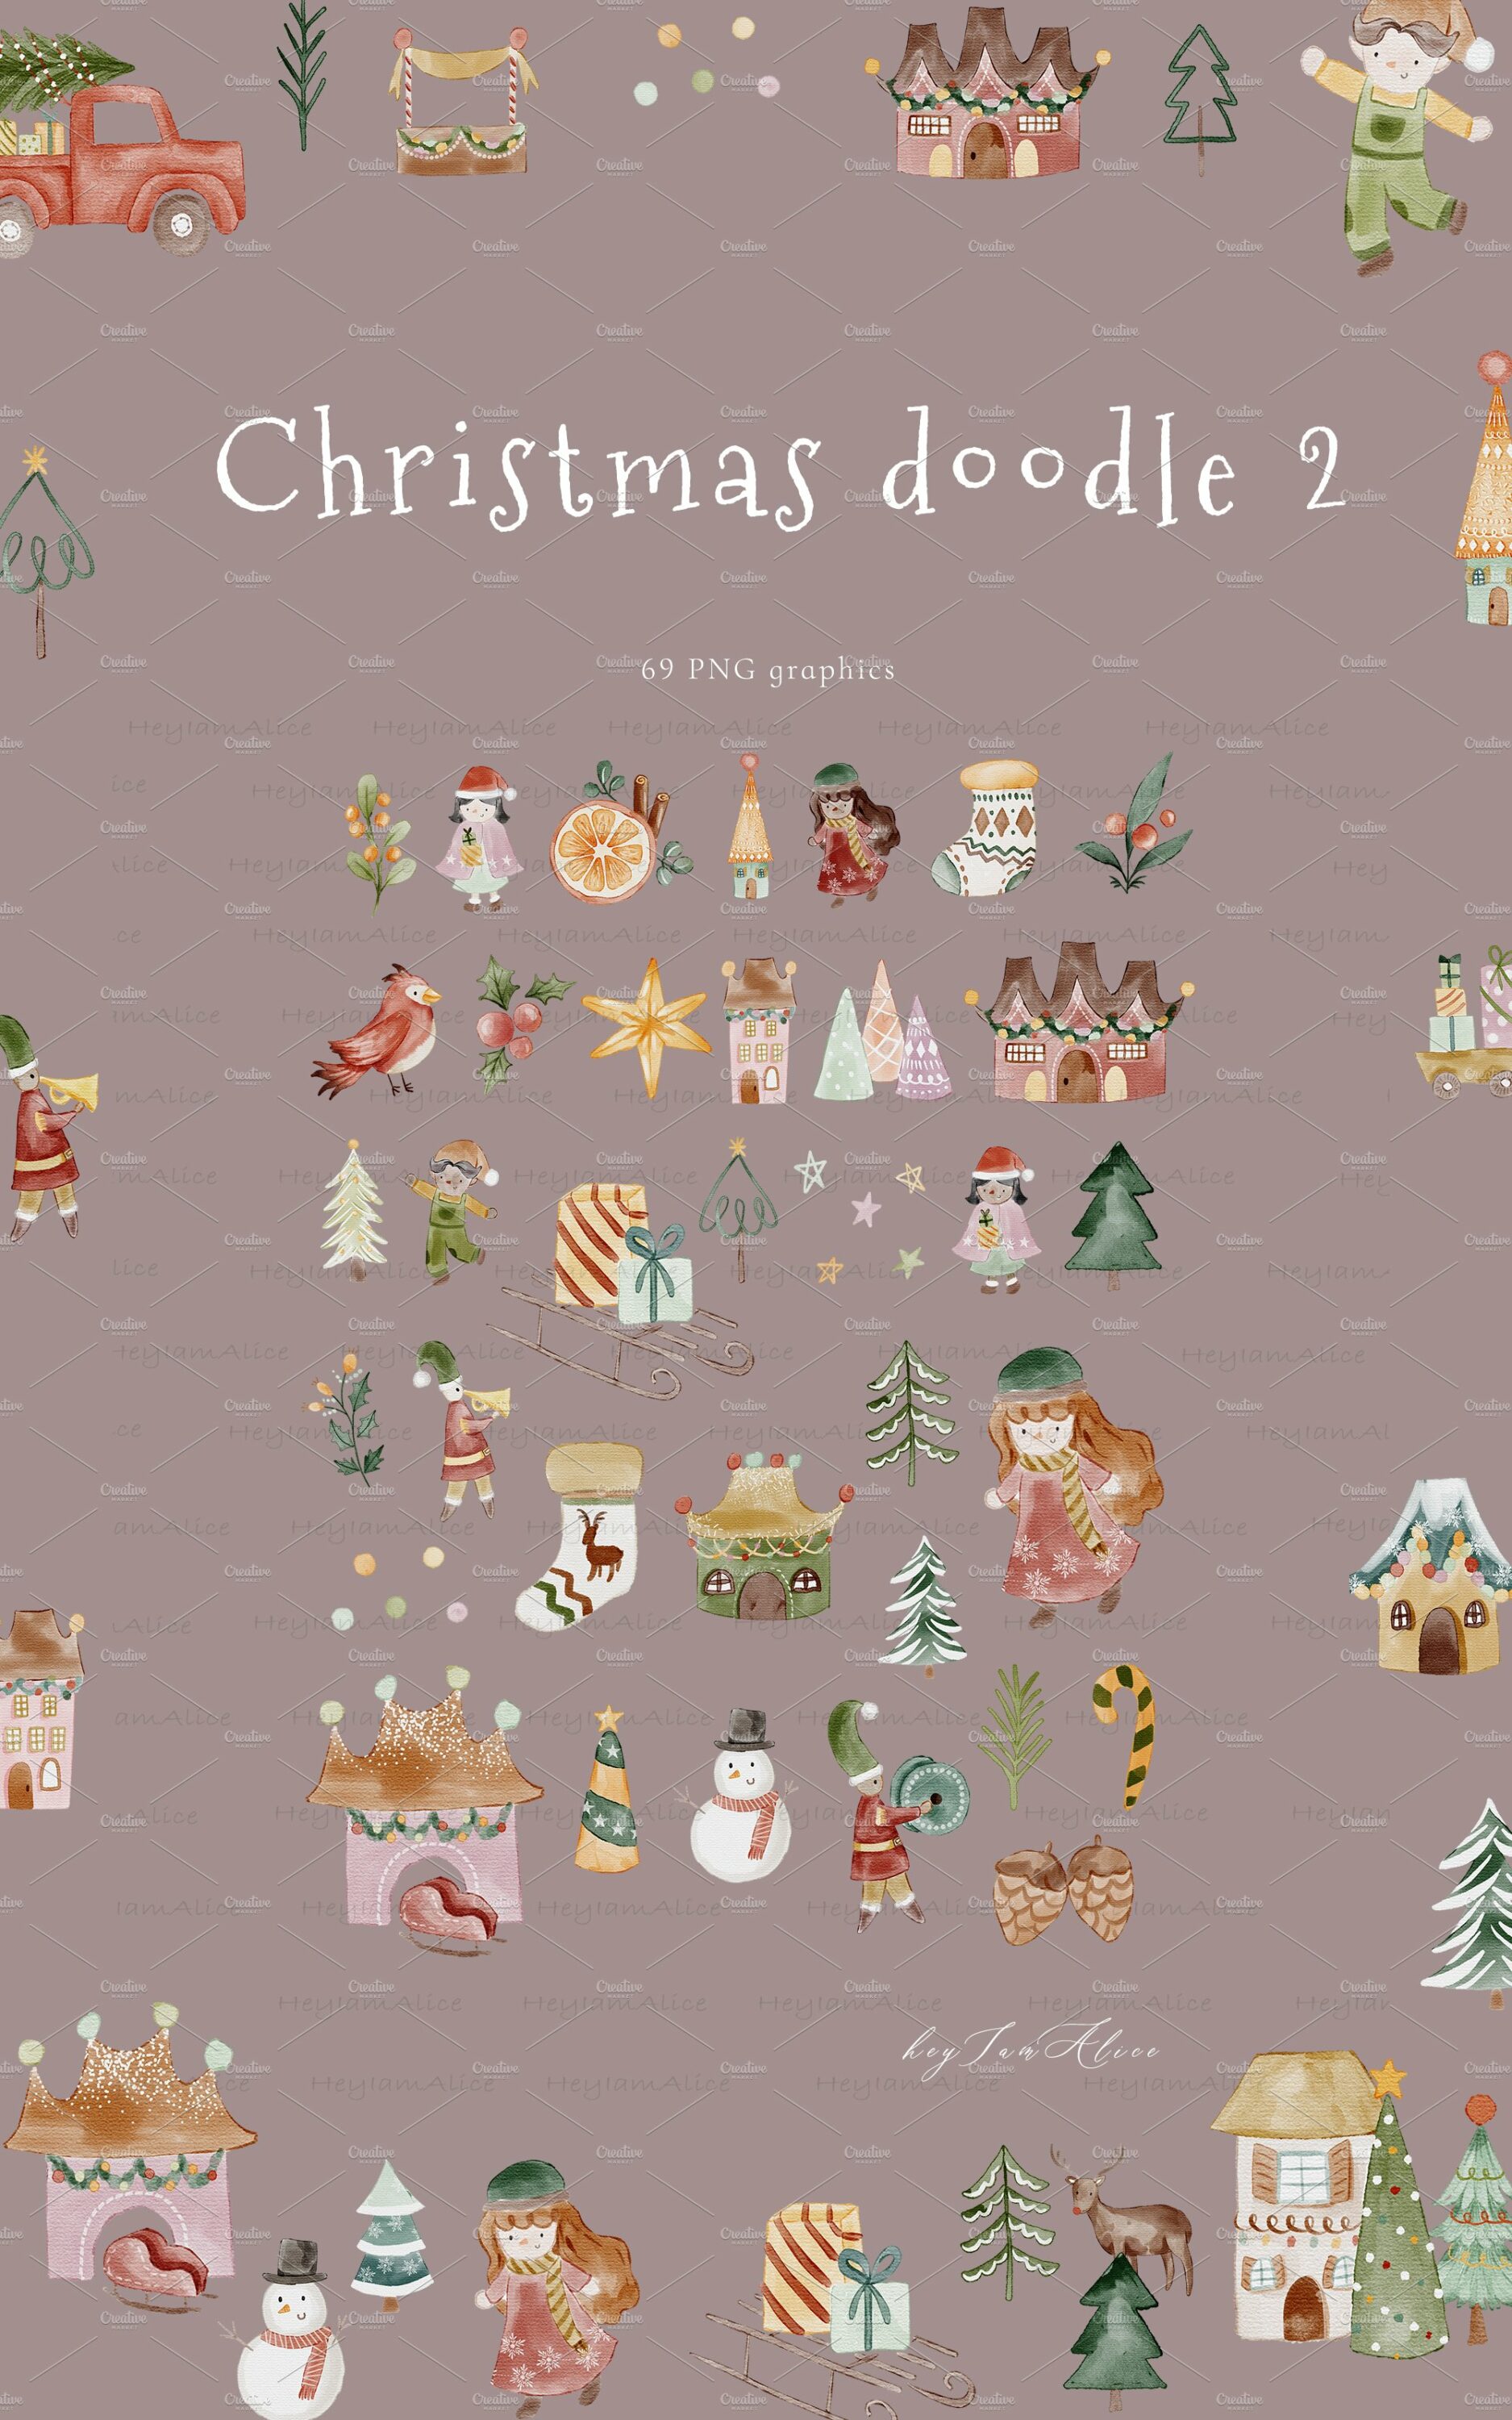 Use this Christmas collection for your illustration.